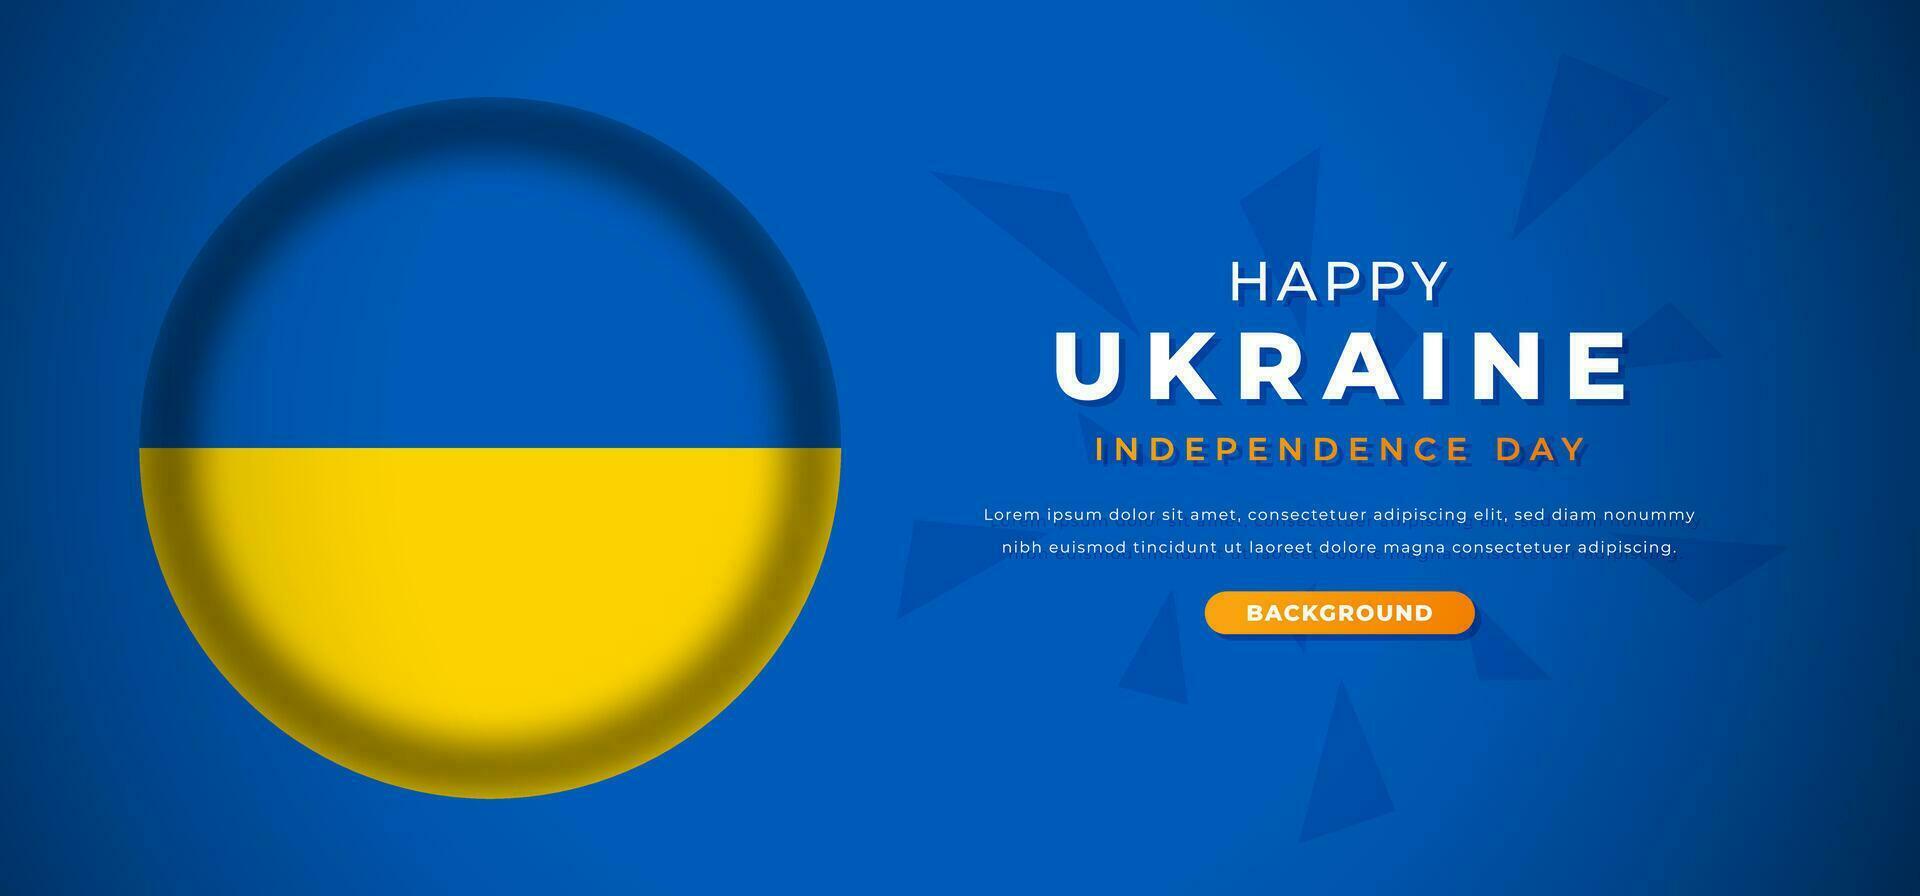 Happy Ukraine Independence Day Design Paper Cut Shapes Background Illustration for Poster, Banner, Advertising, Greeting Card vector